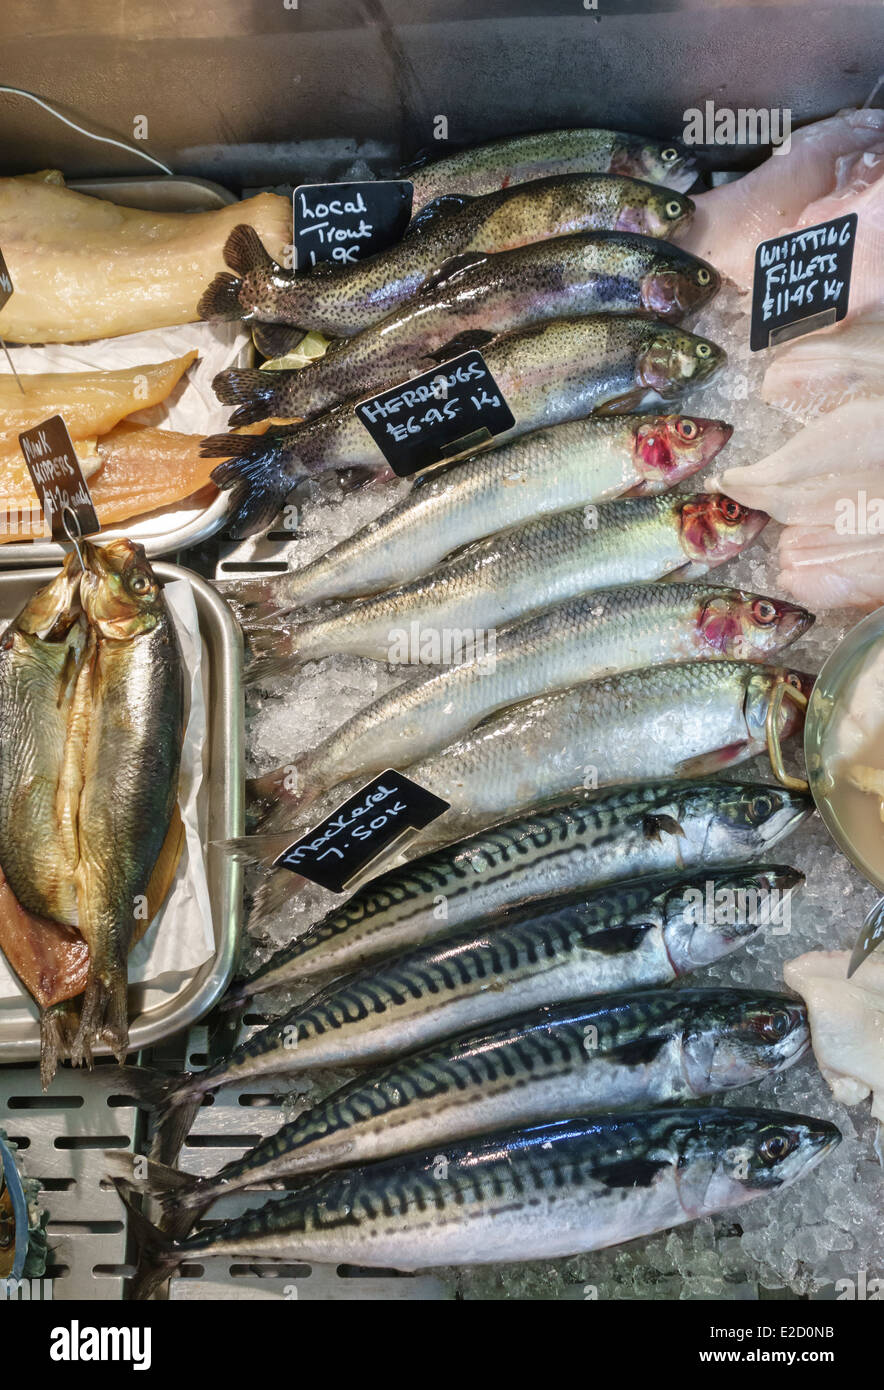 Fresh fish for sale in a local fishmonger's shop, Wales, UK - trout, herring and mackerel Stock Photo